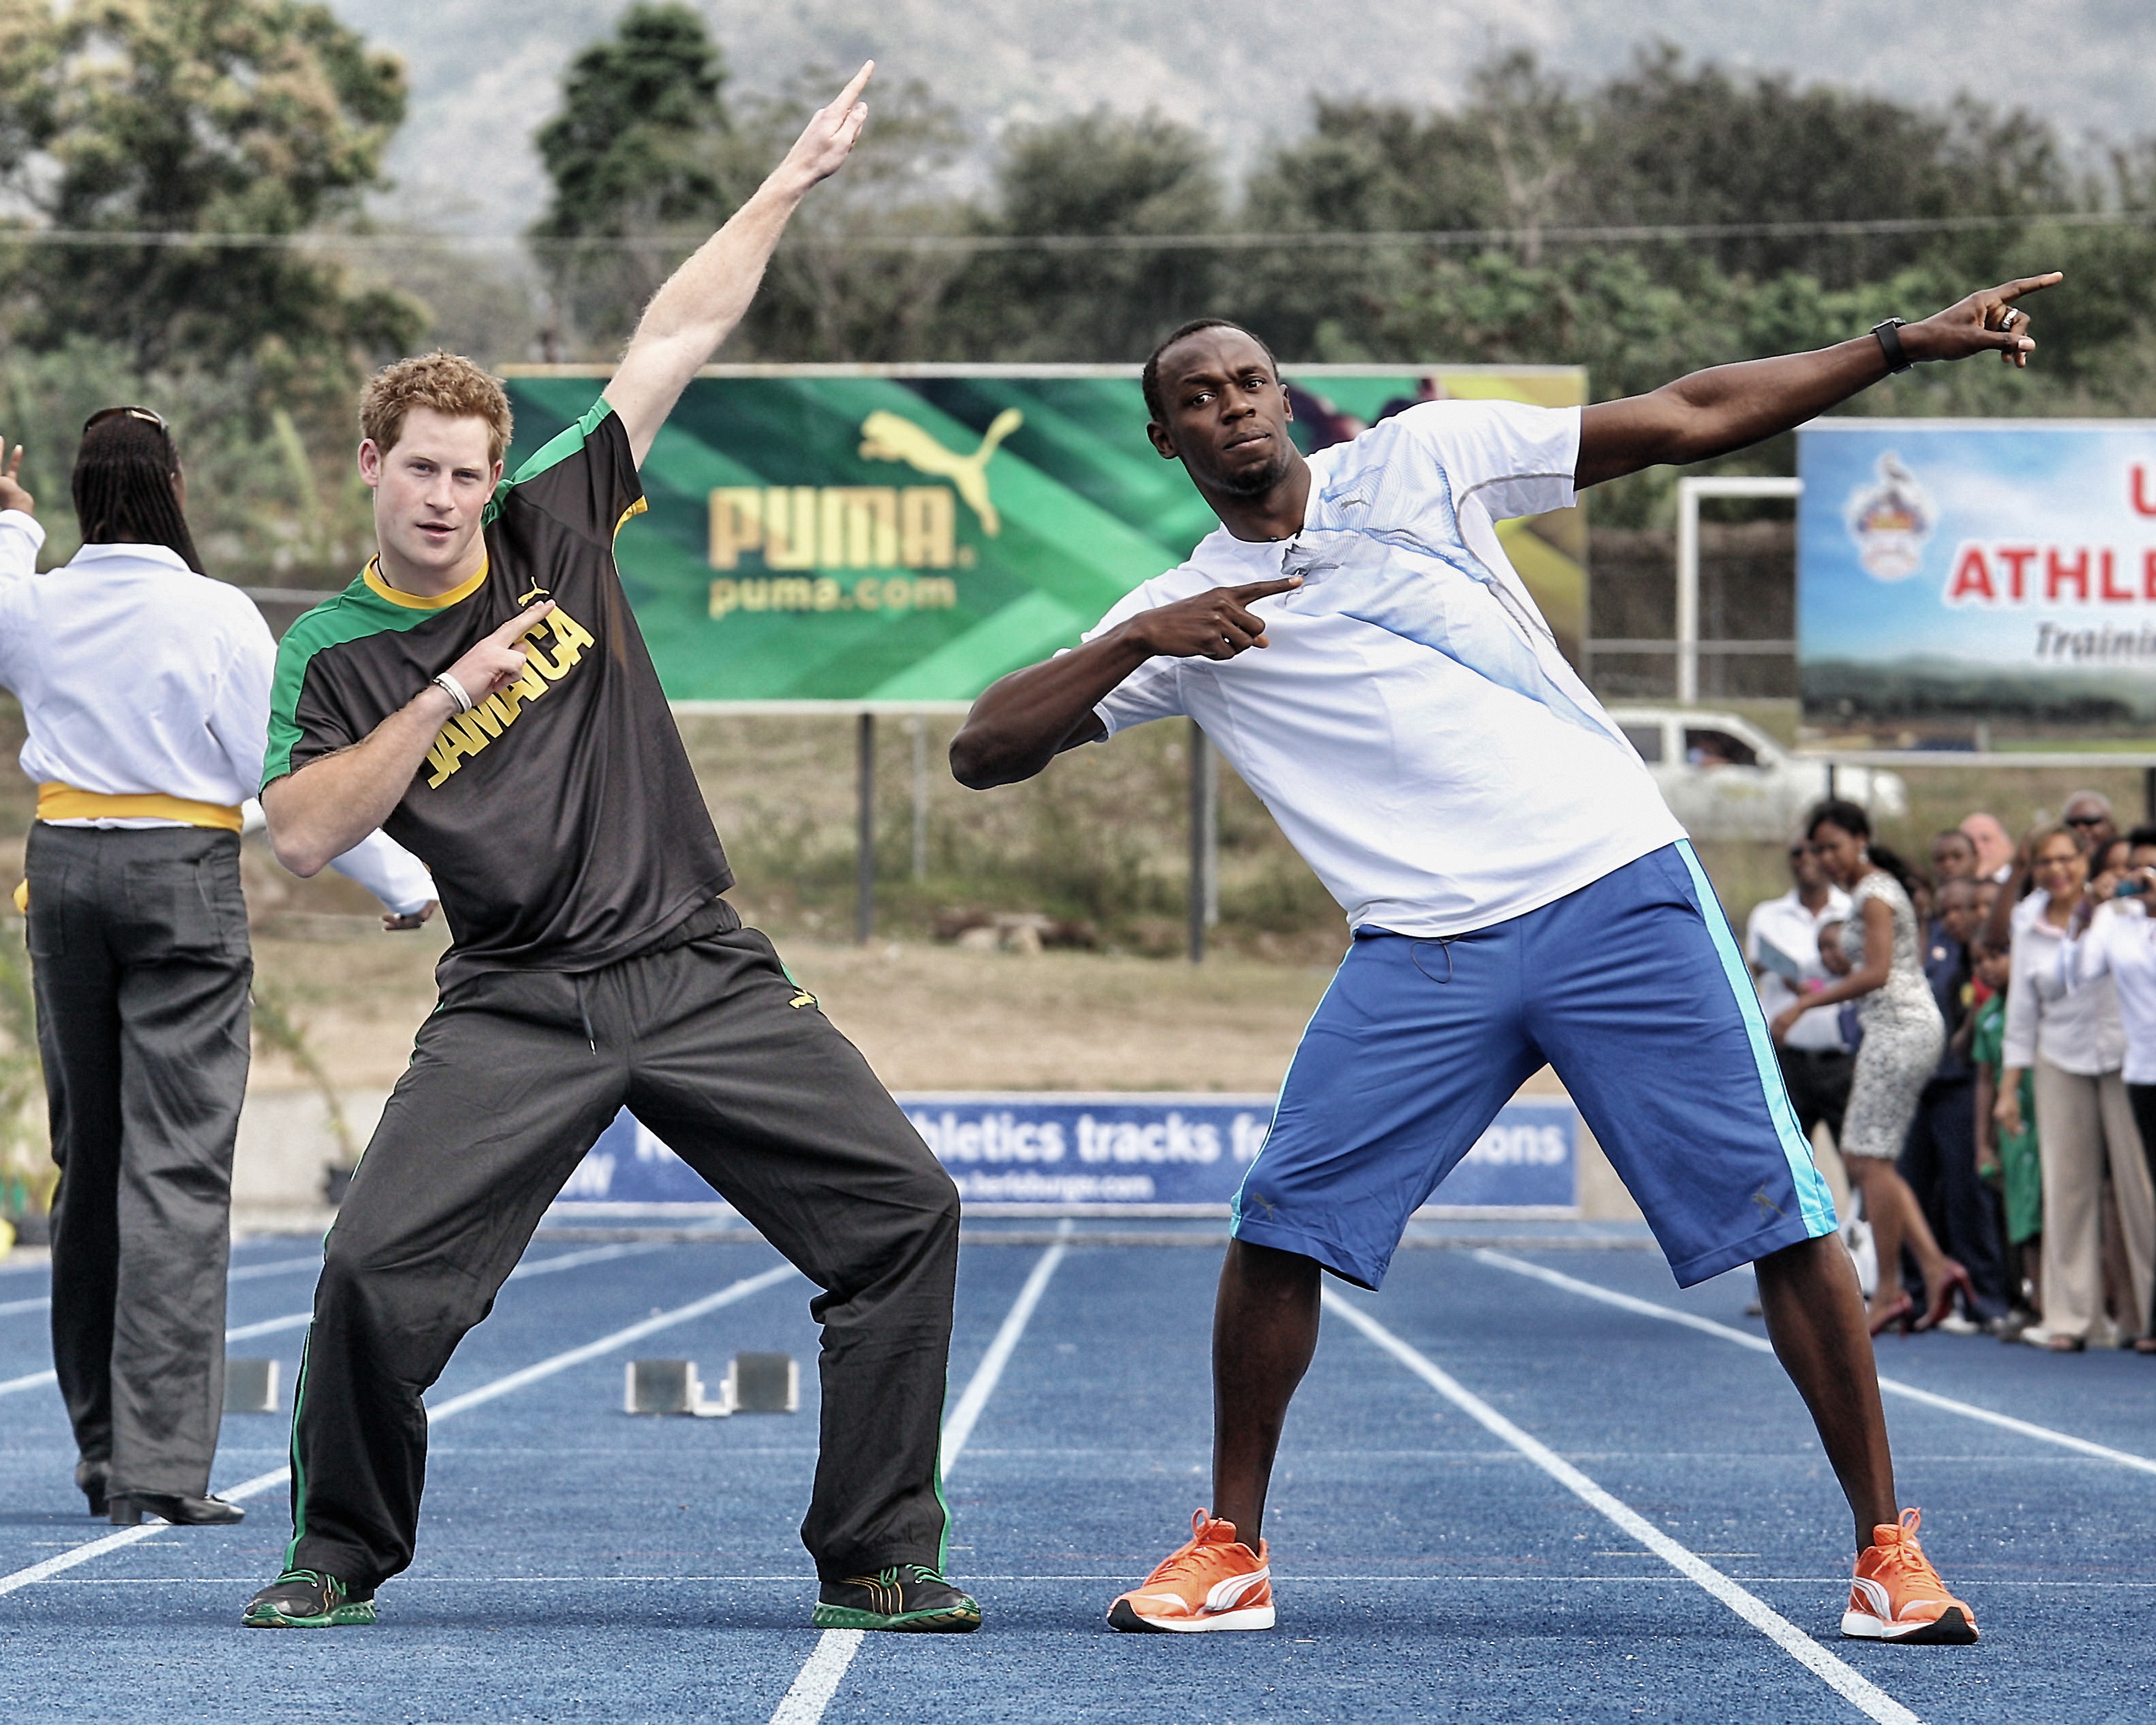 Prince Harry races Usain Bolt at the Usain Bolt Track at the University of the West Indies in Kingston, Jamaica on March 6, 2012. (Chris Jackson—Getty Images)